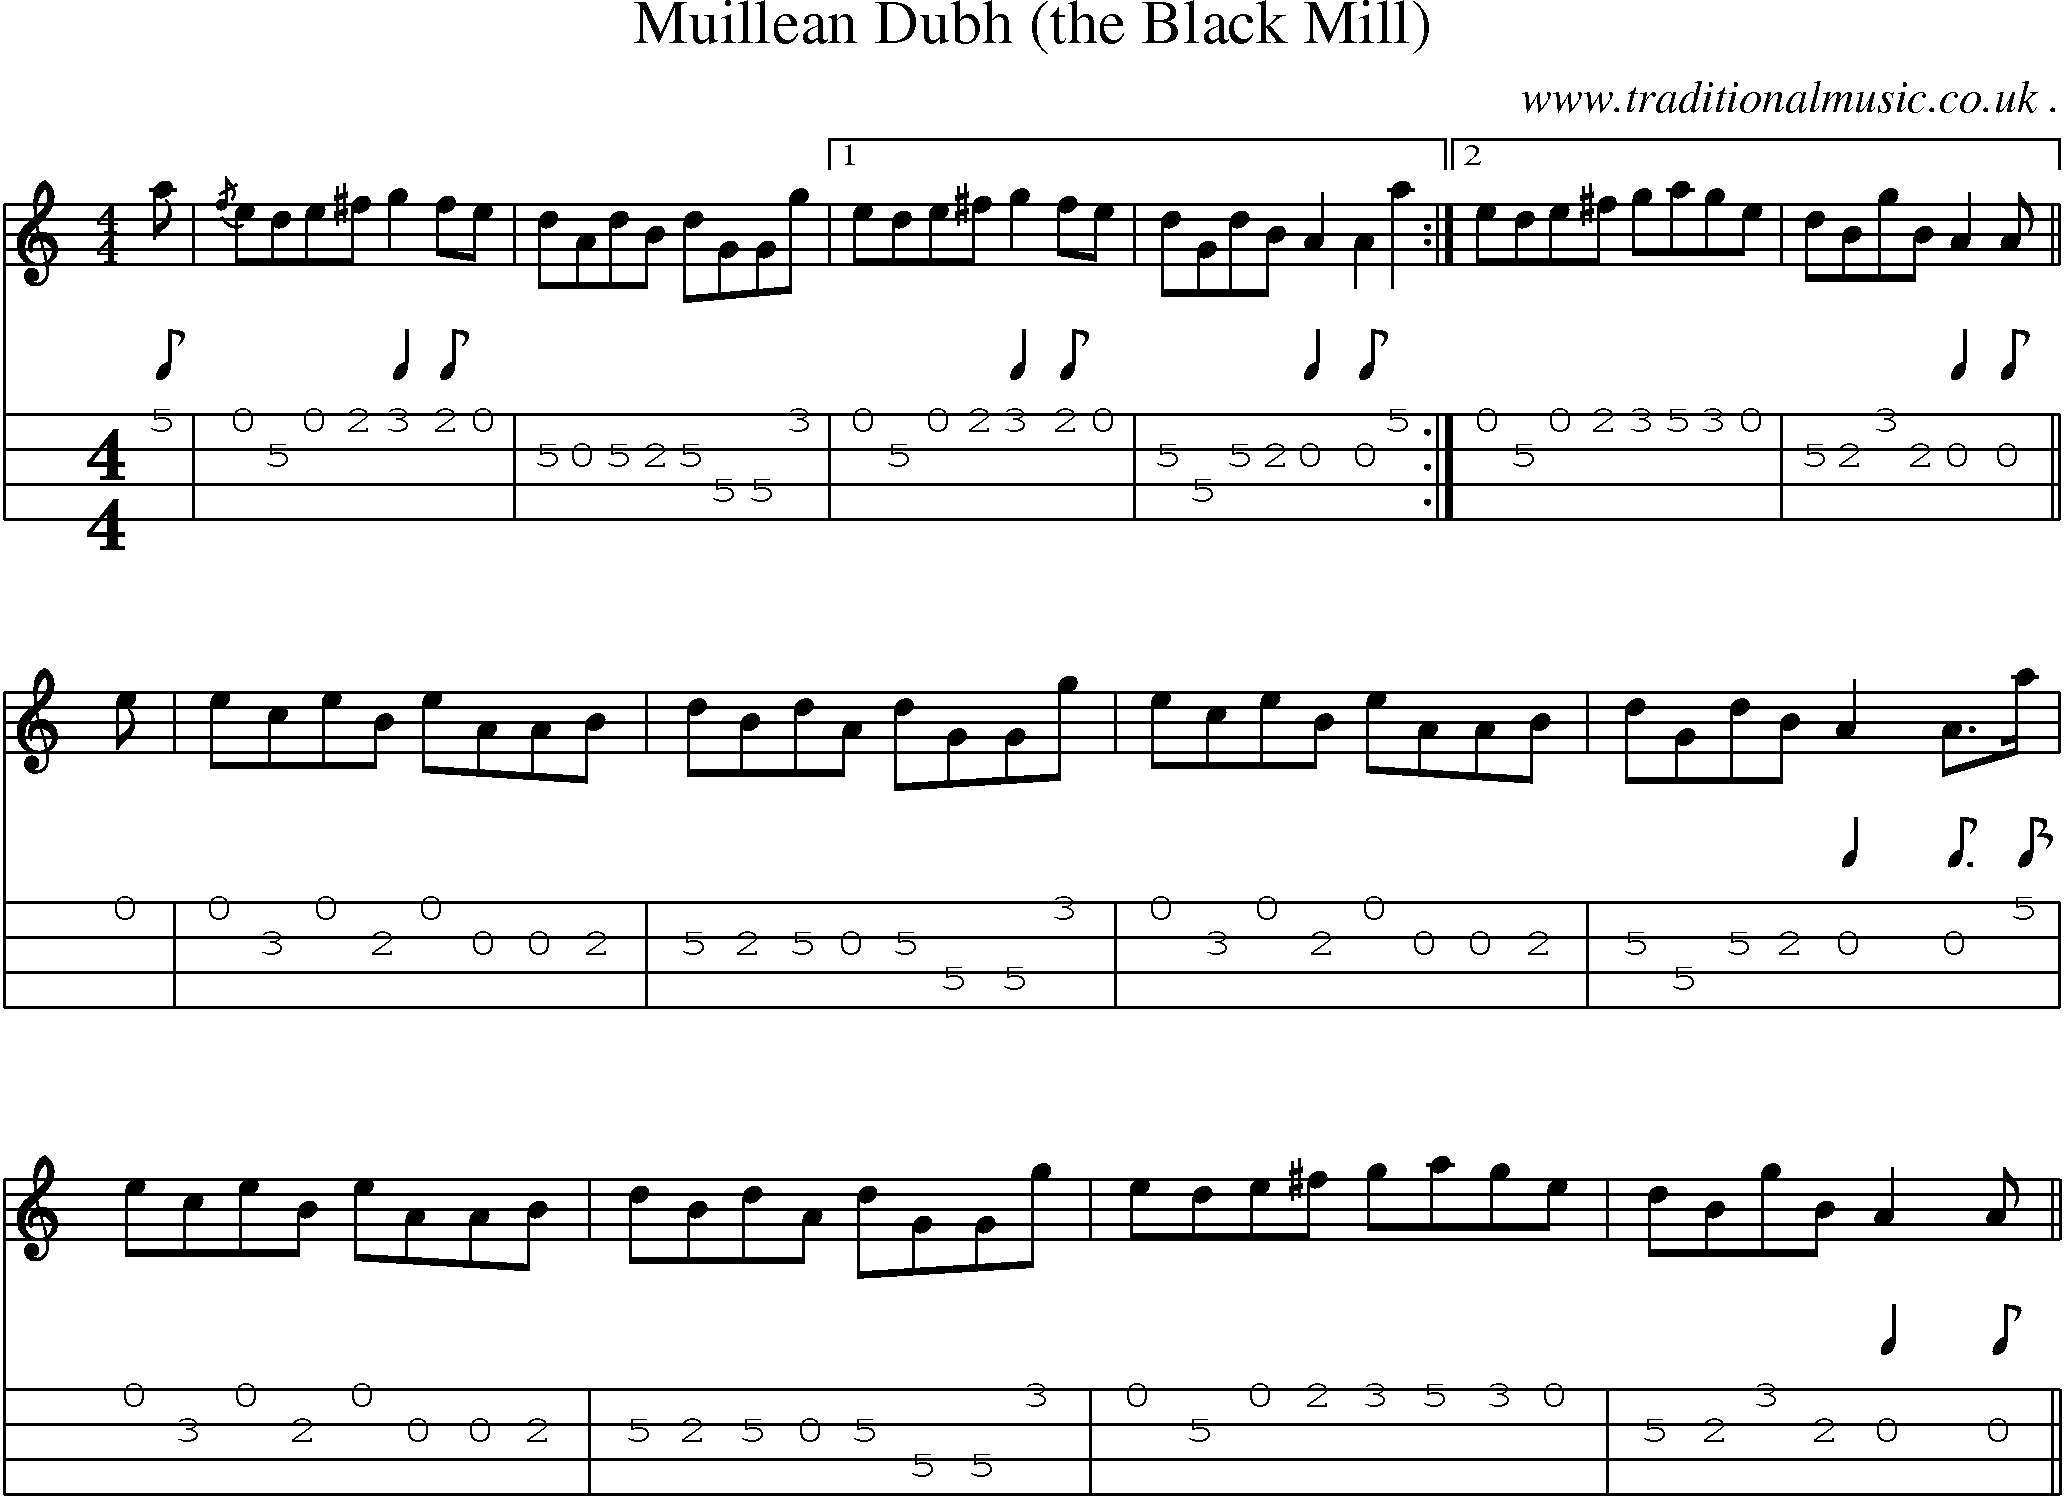 Sheet-music  score, Chords and Mandolin Tabs for Muillean Dubh The Black Mill